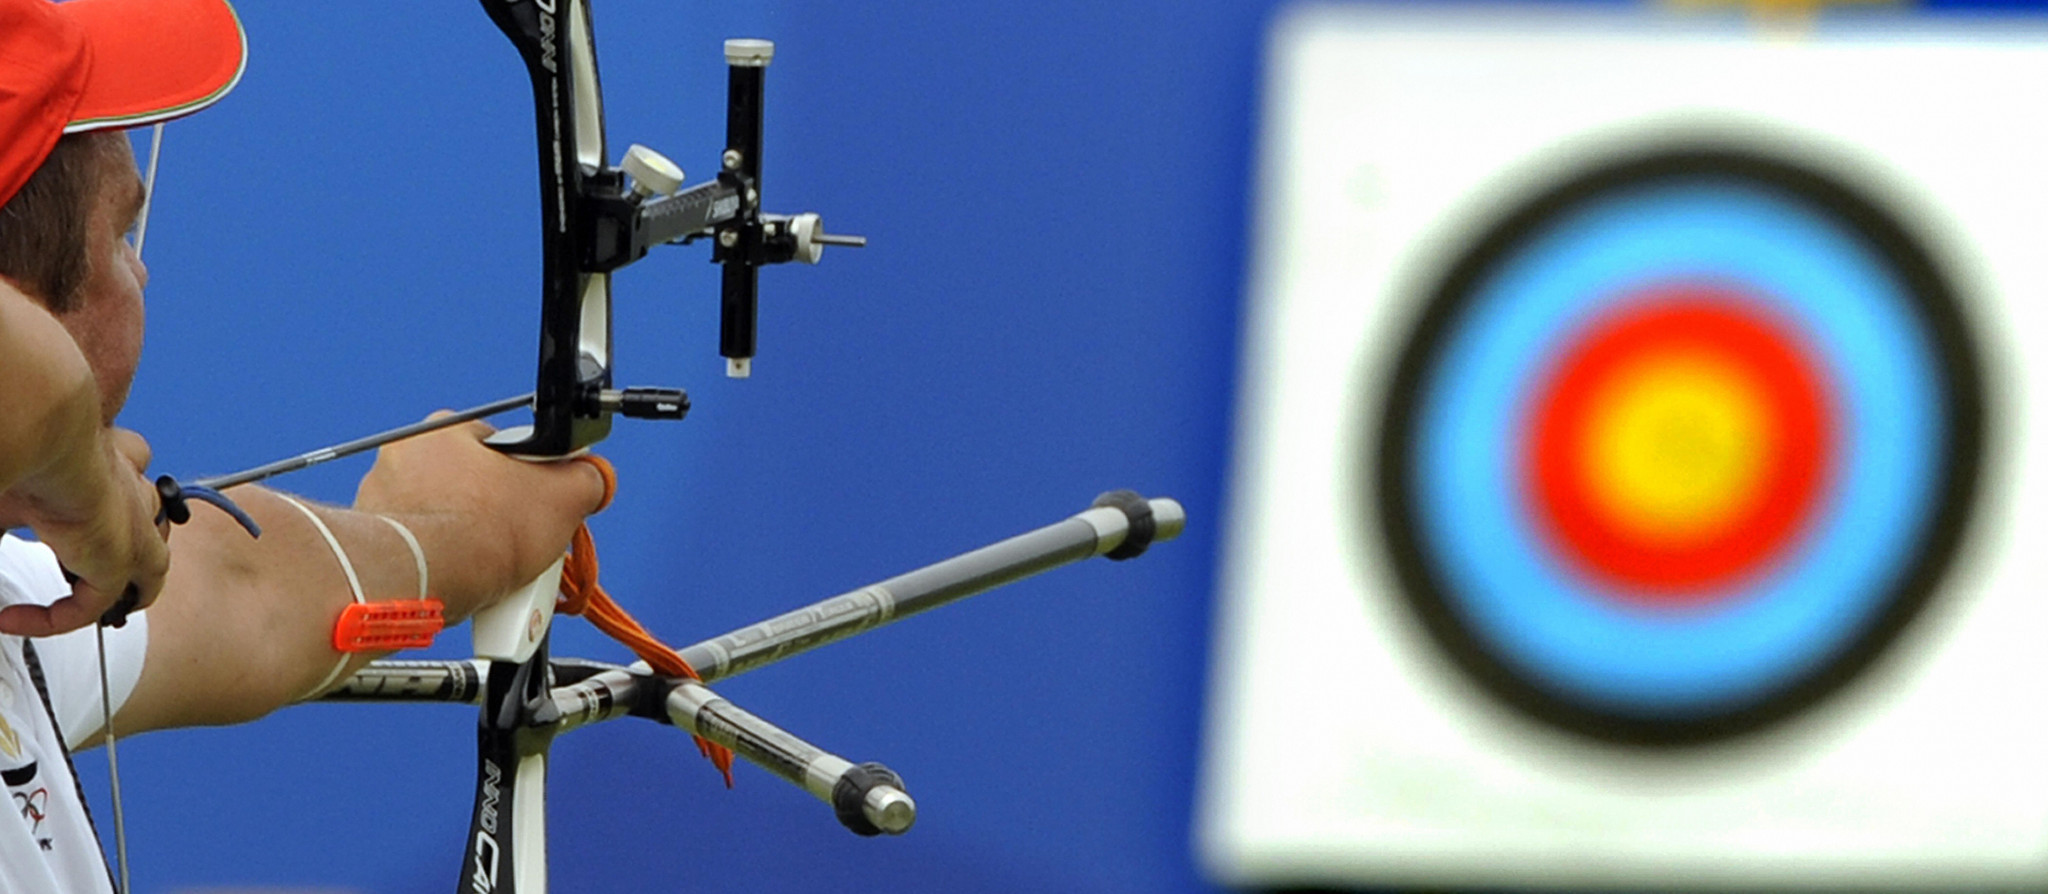 Minsk 2019 to hold archery test event for European Games in May